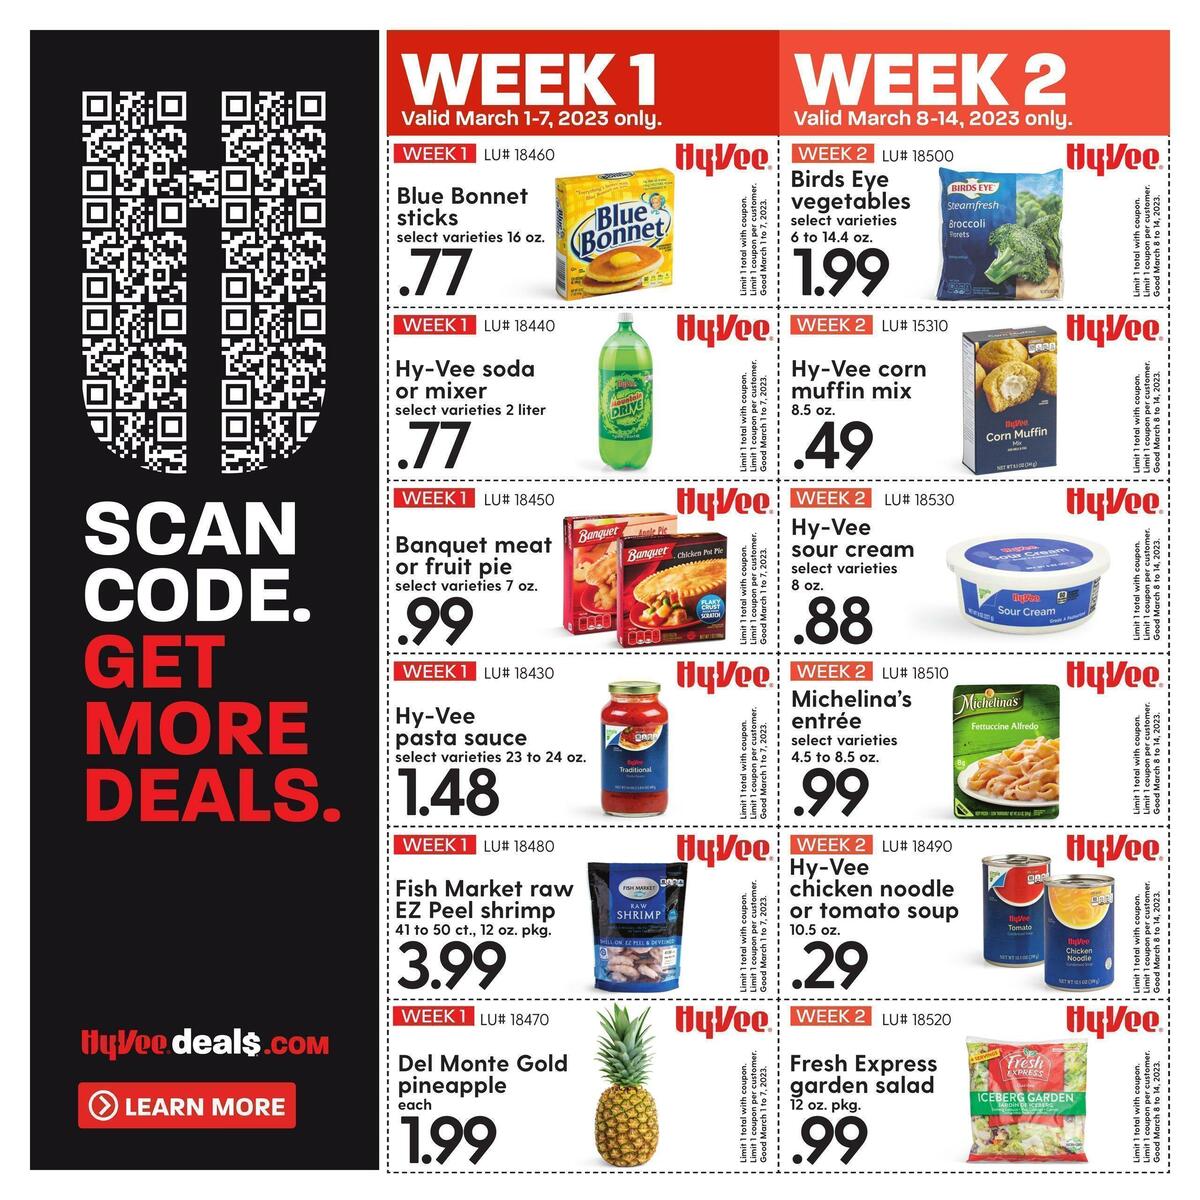 Hy-Vee March Monthly Coupon Weekly Ad from March 1